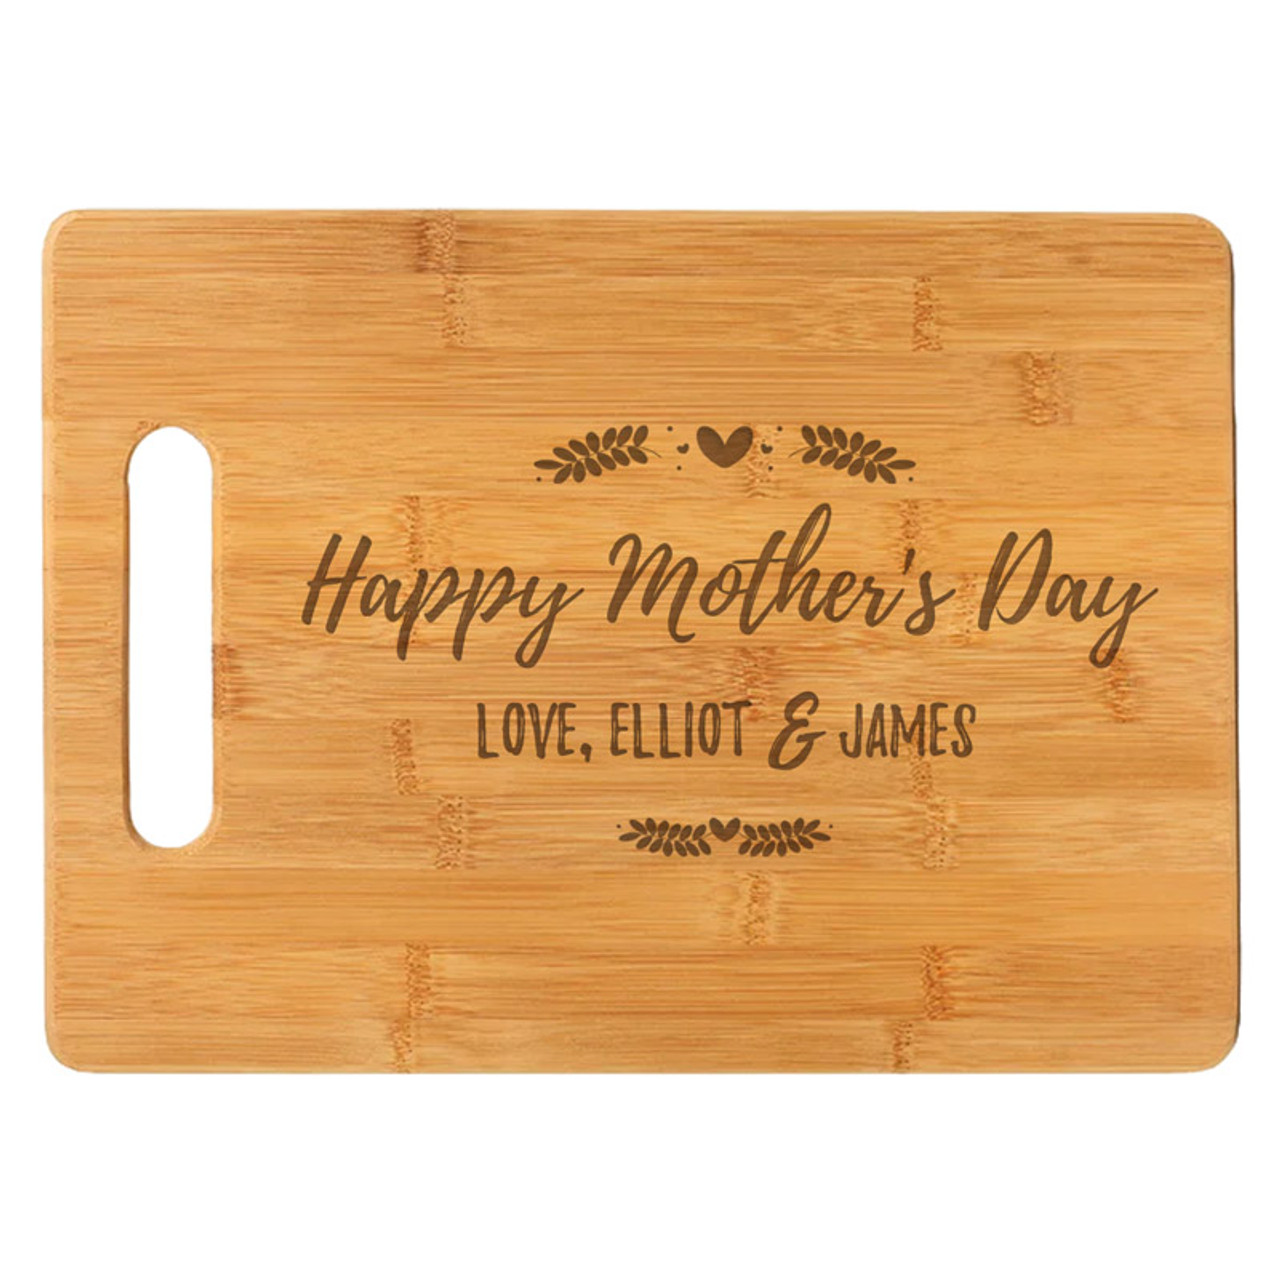 https://cdn11.bigcommerce.com/s-d22a0/images/stencil/1280x1280/products/2401/12205/personalized-cutting-board-mothers-day-gifts-floral-CTB427_mom__85071.1656368755.jpg?c=2